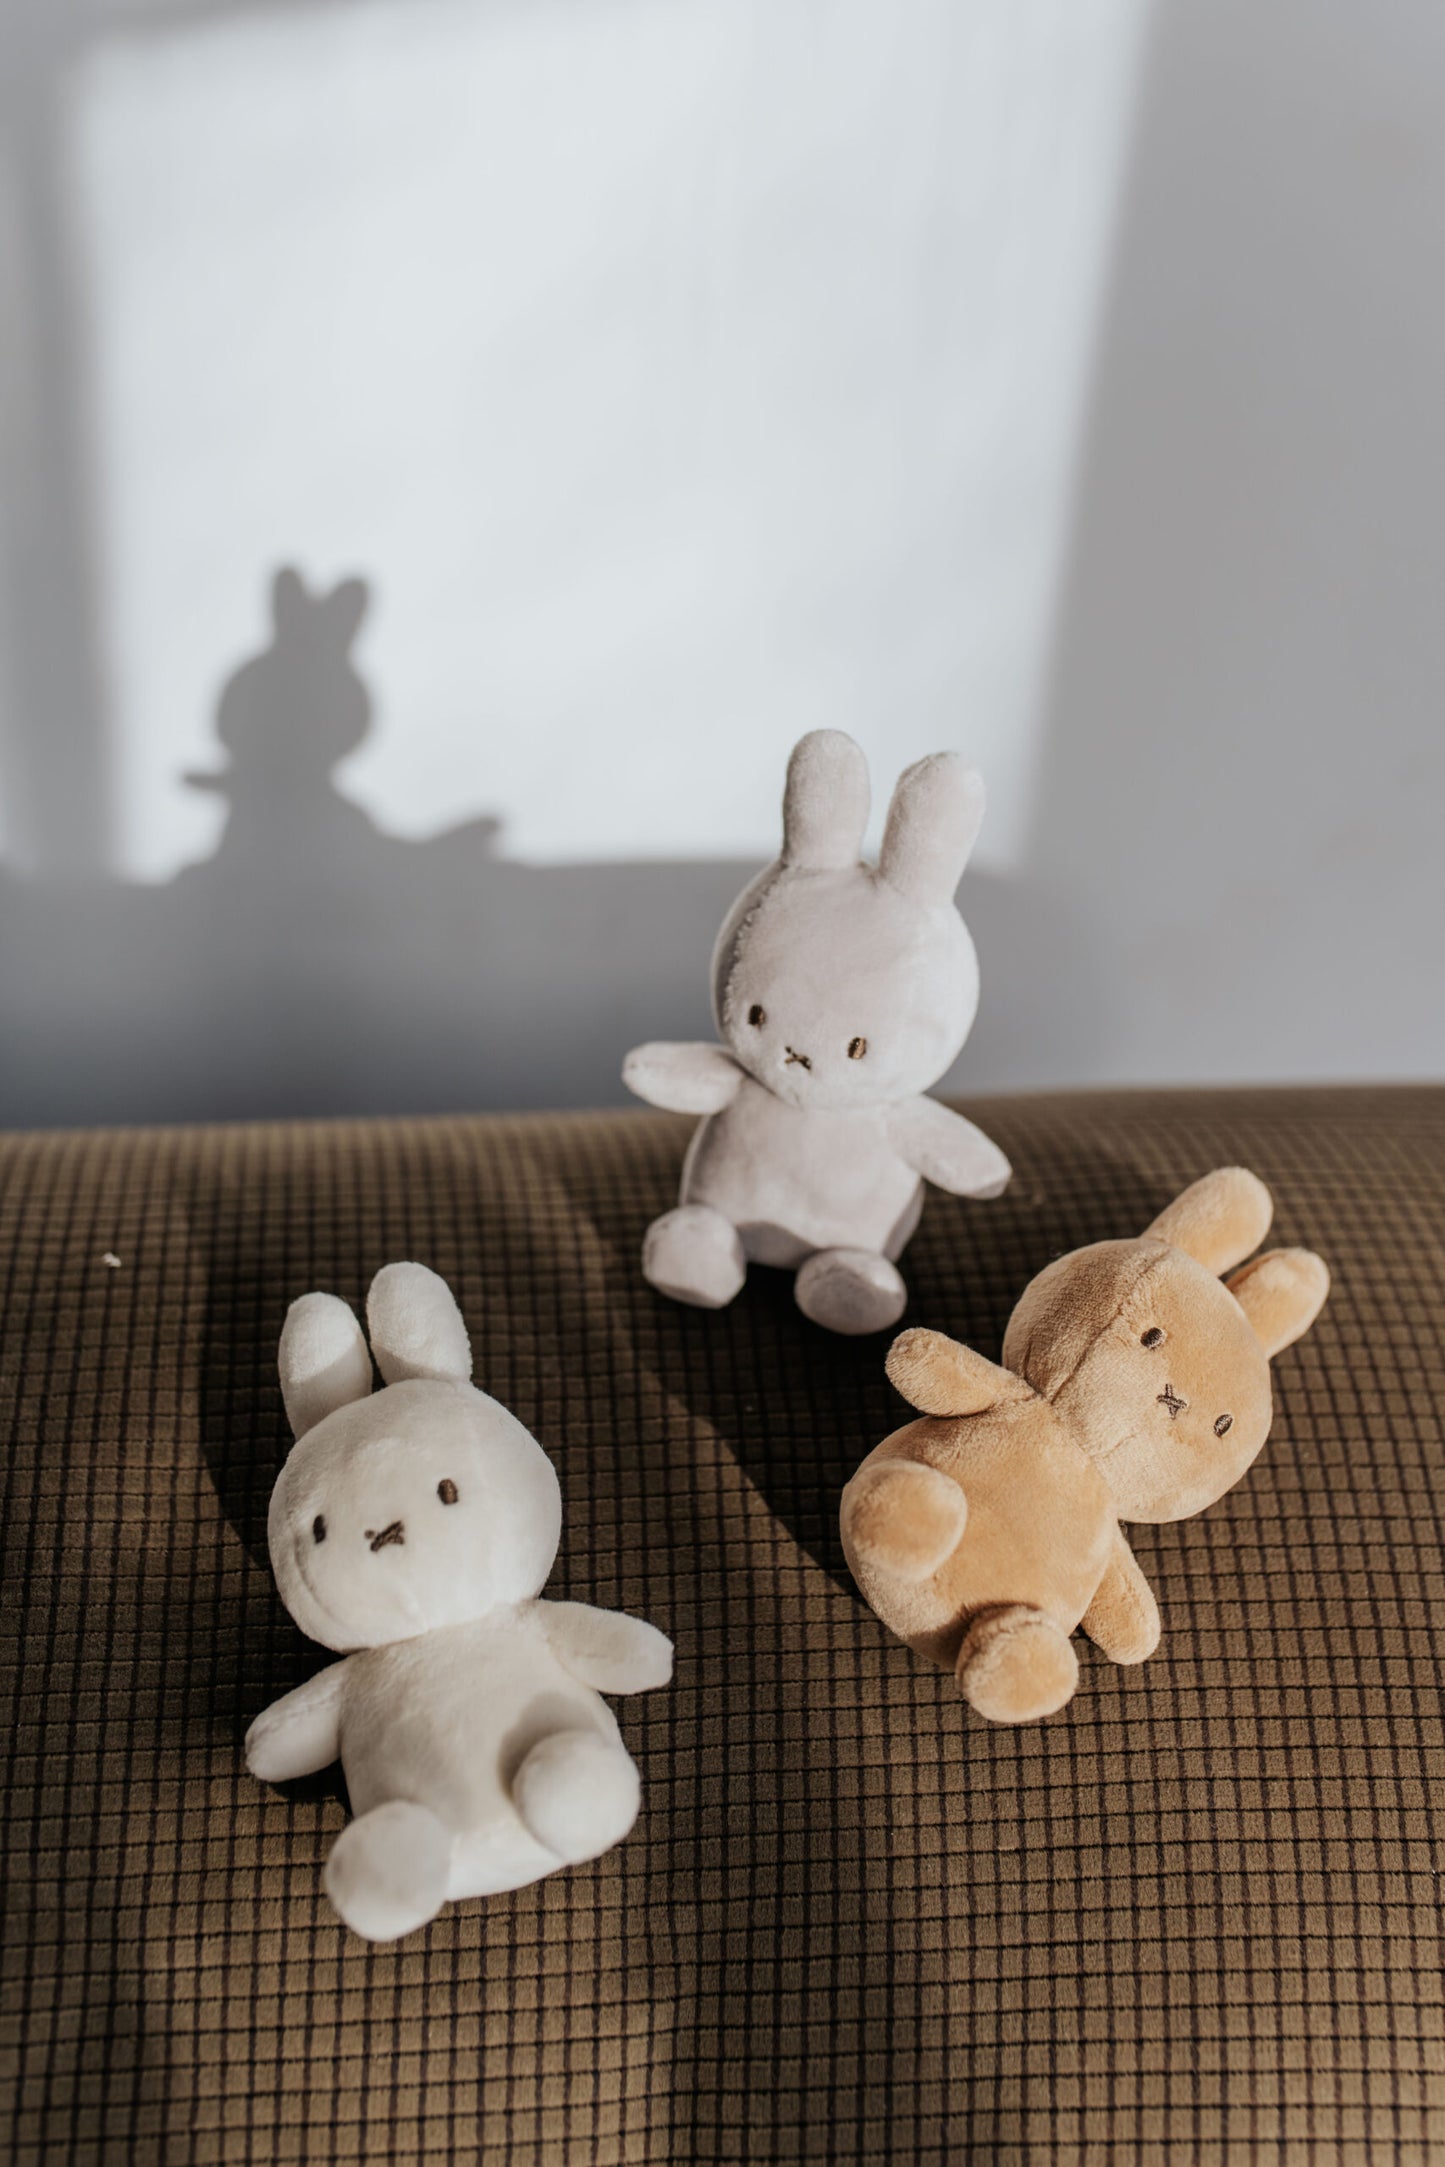 Lucky Miffy Sitting Beige in giftbox - 10cm - 4"